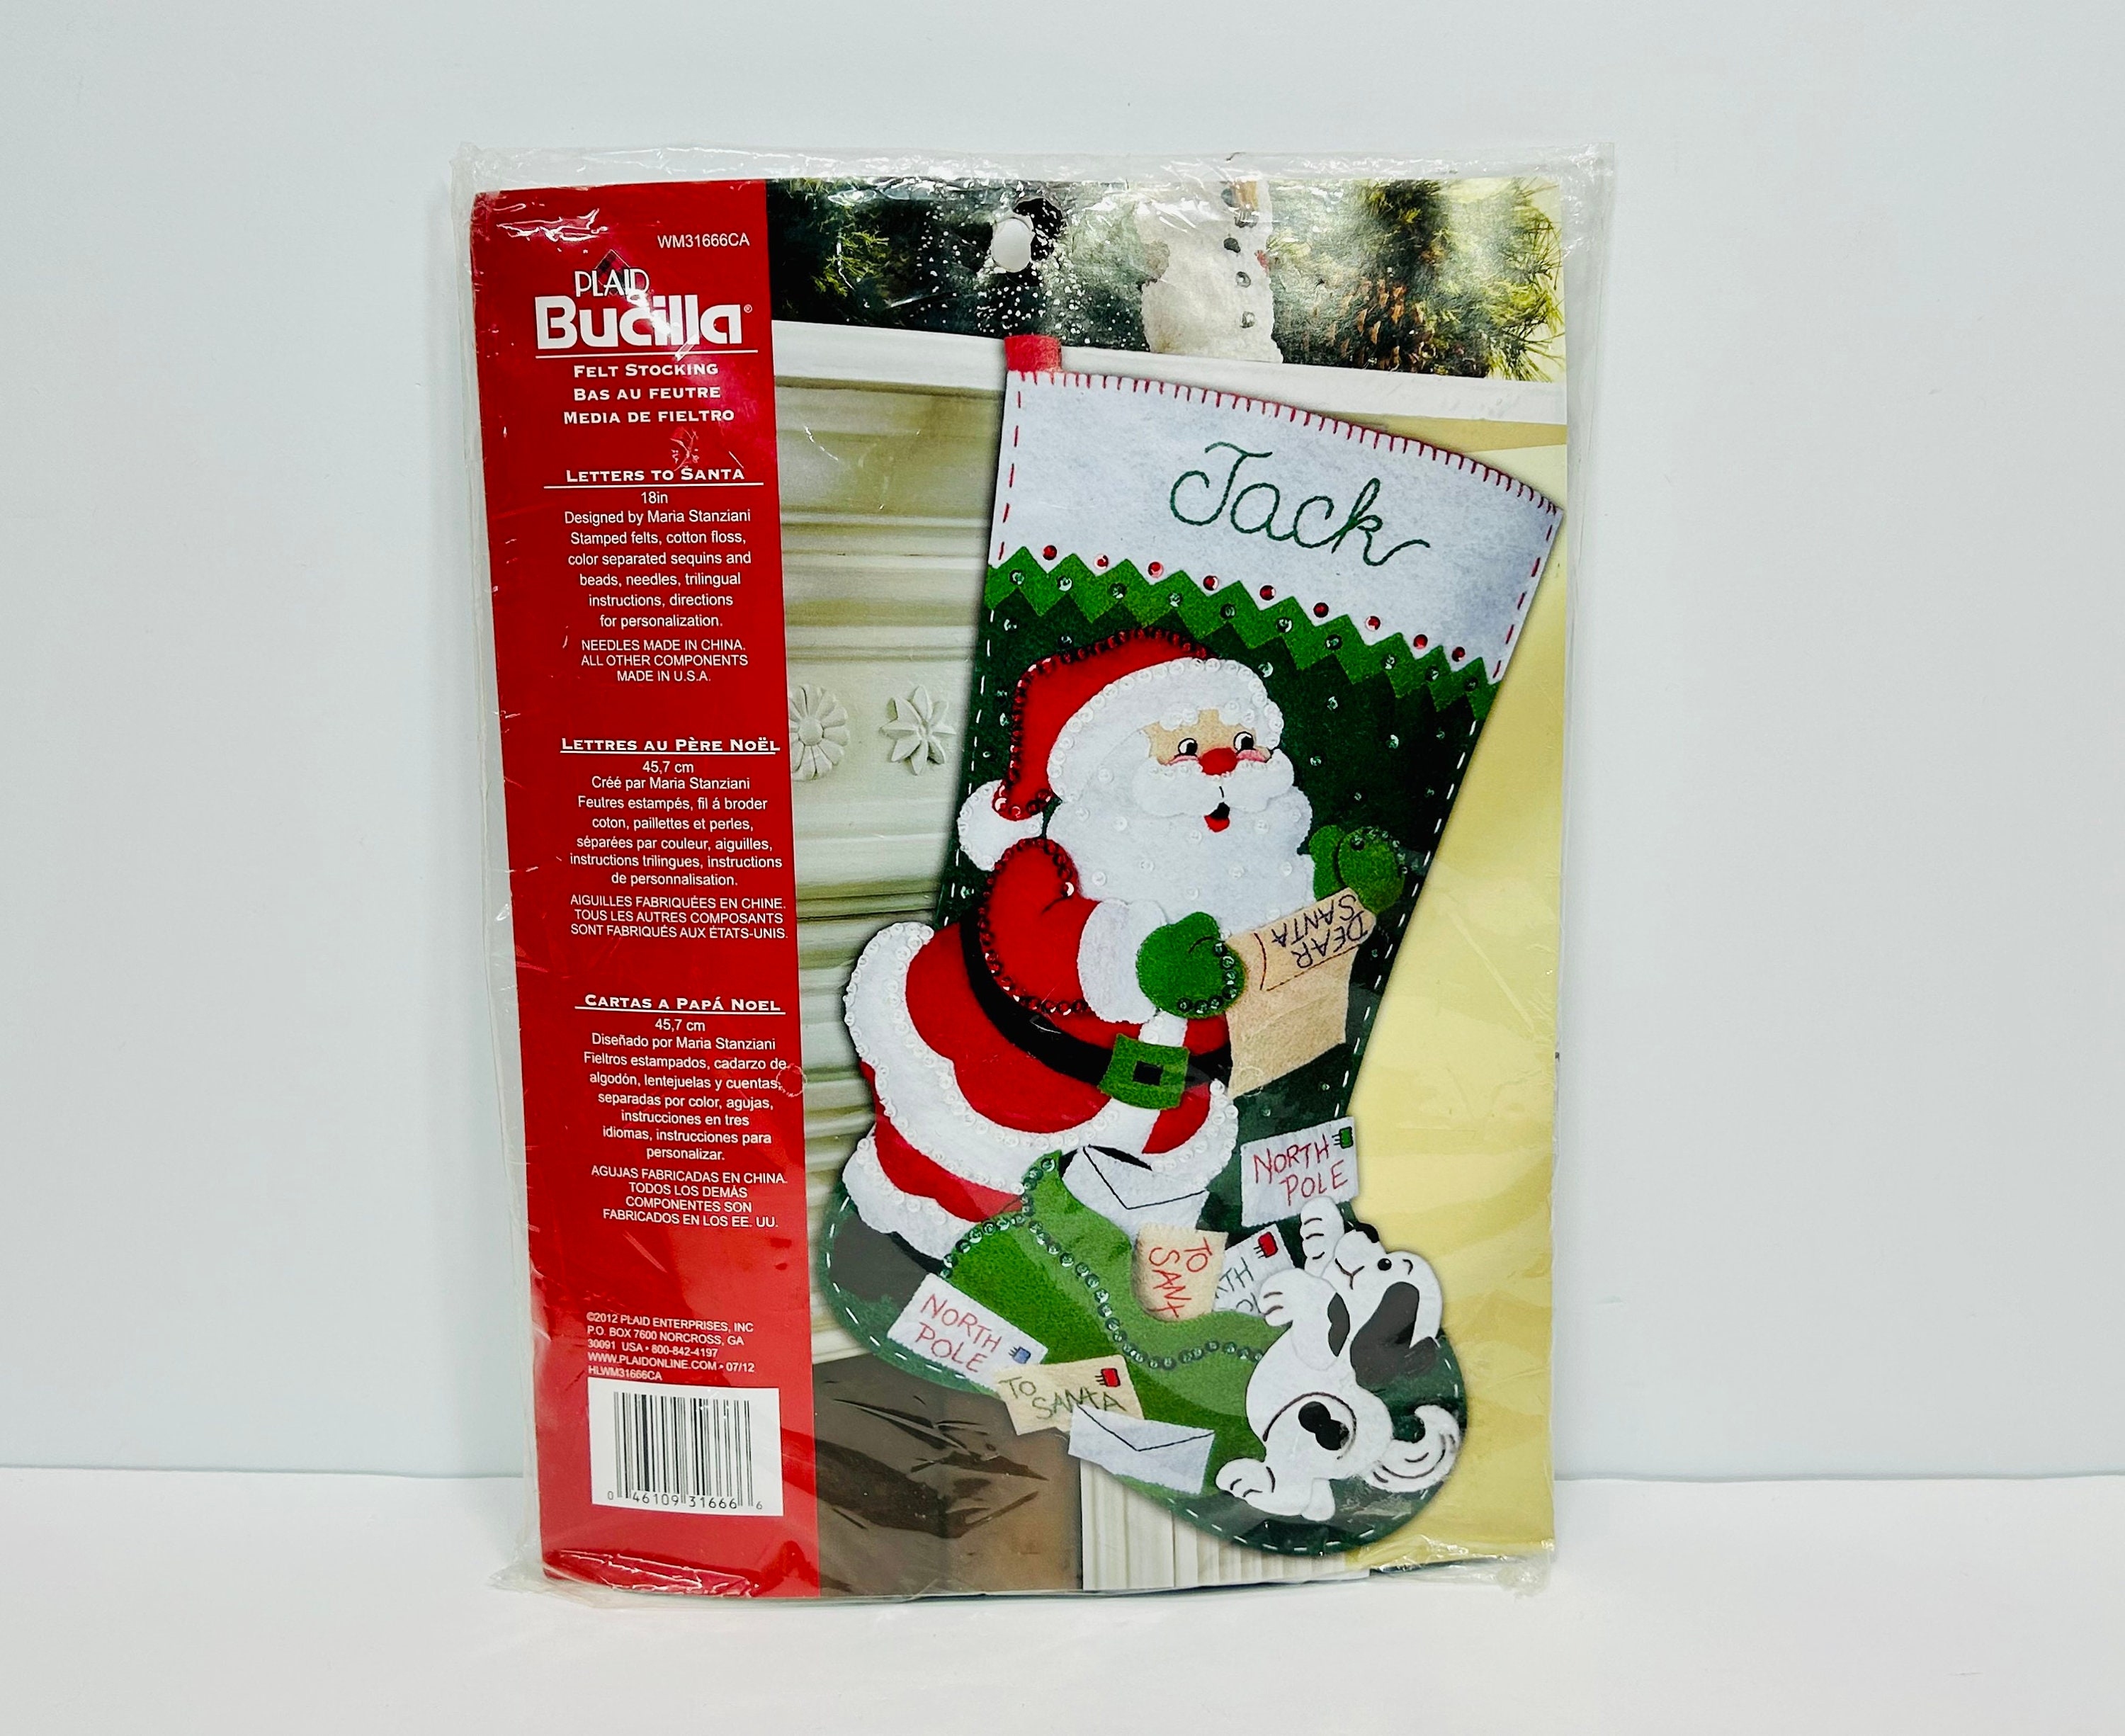 Plaid Bucilla Christmas choice felt stocking kits see pictures and  variations*